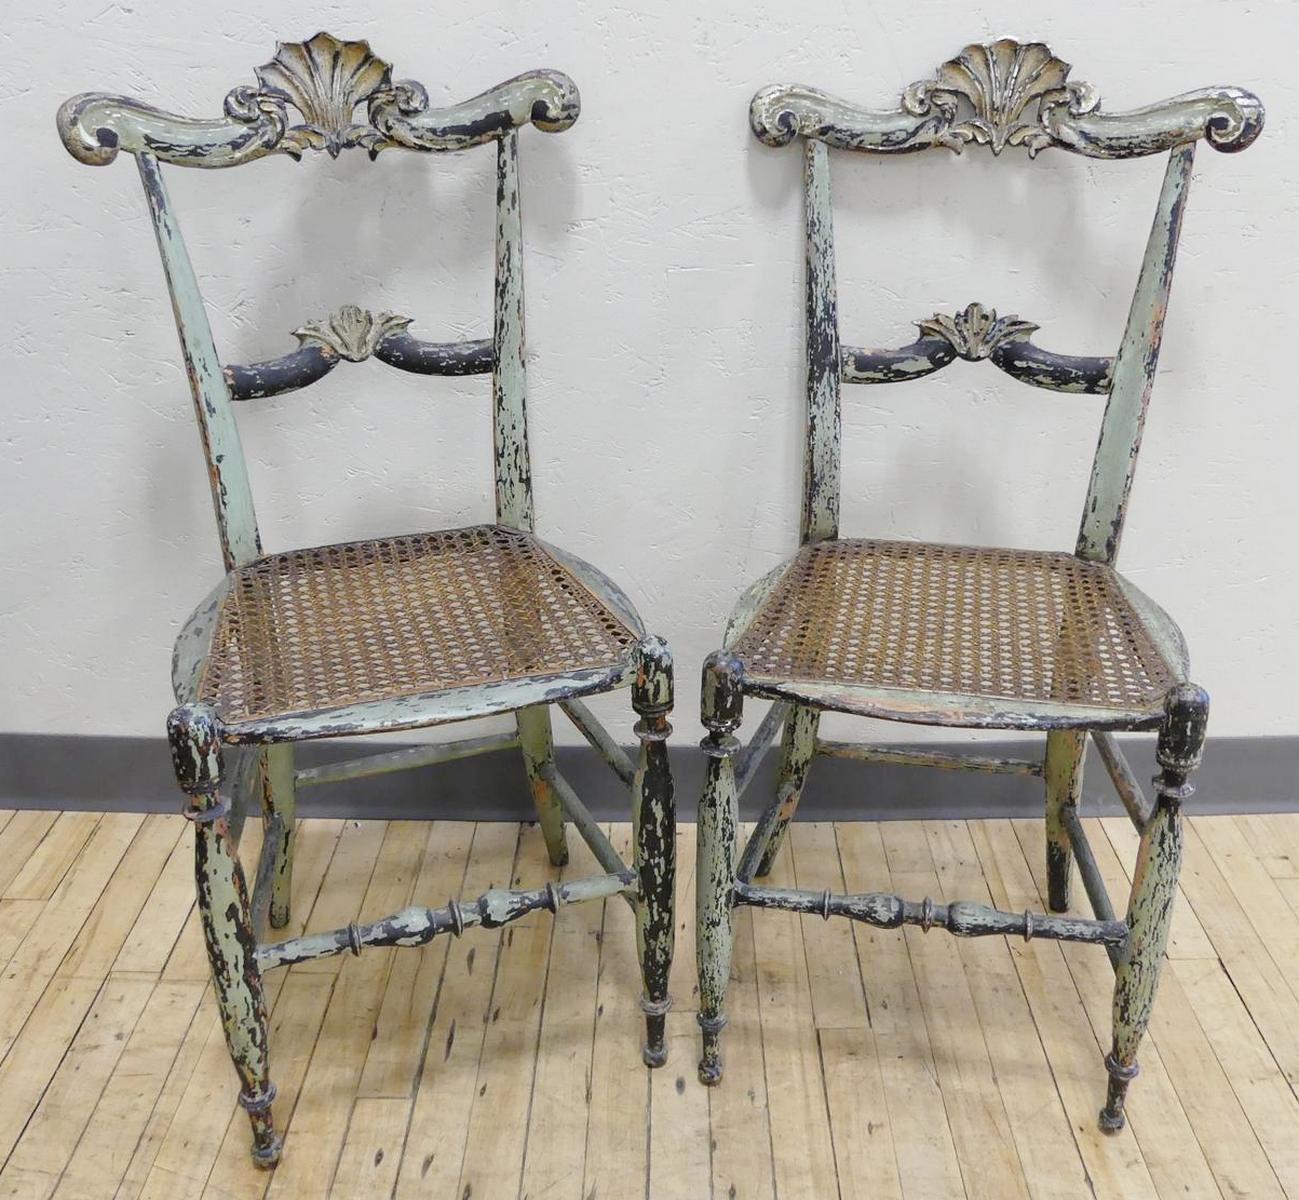 PAIR OF CANED SIDE CHAIRS